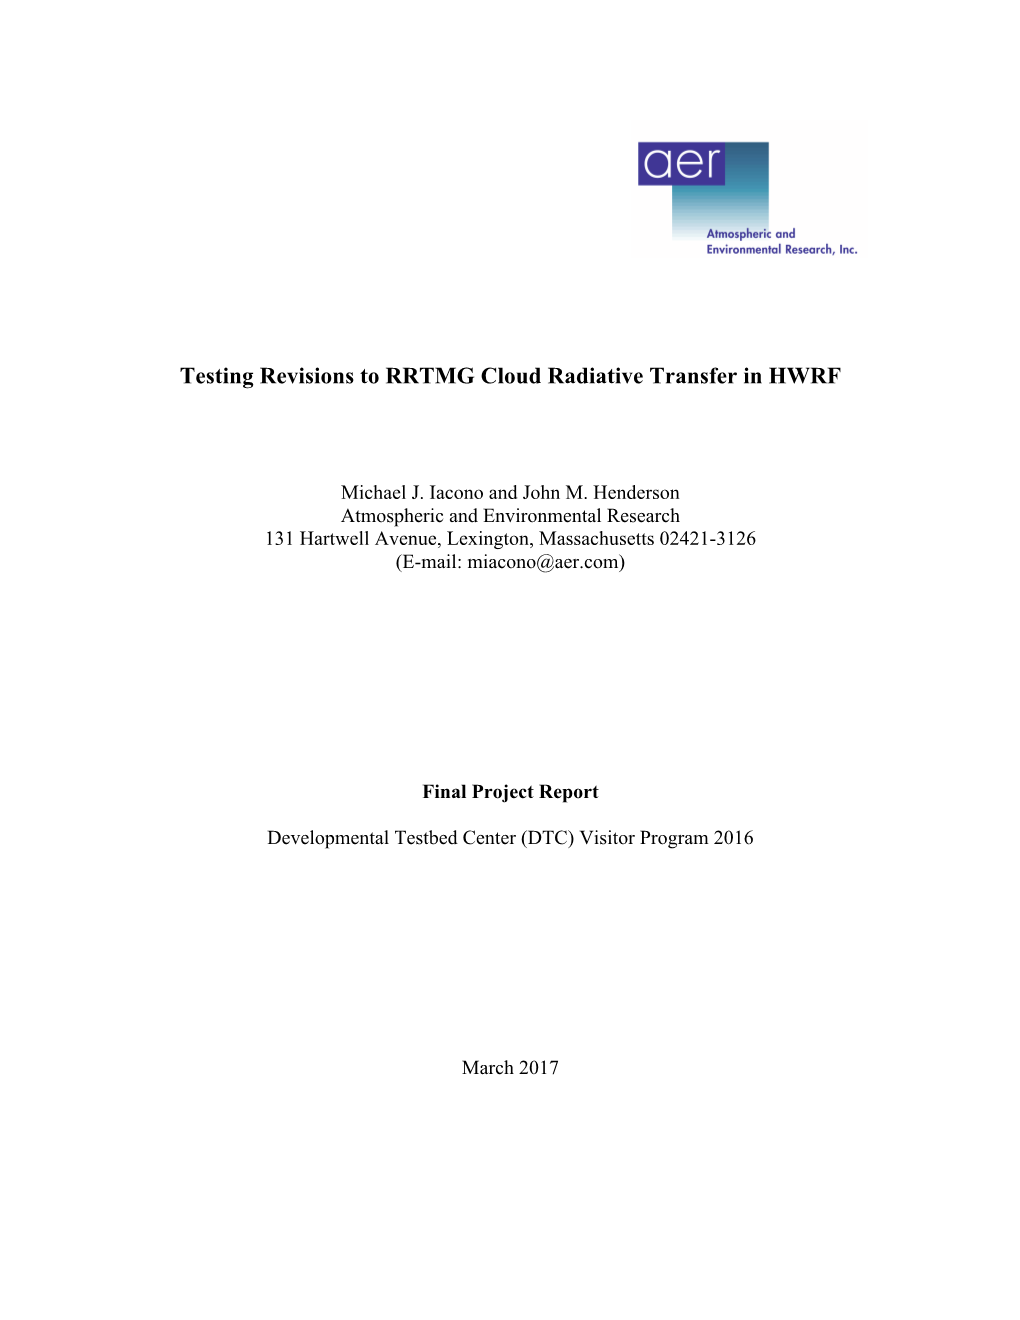 Testing Revisions to RRTMG Cloud Radiative Transfer in HWRF